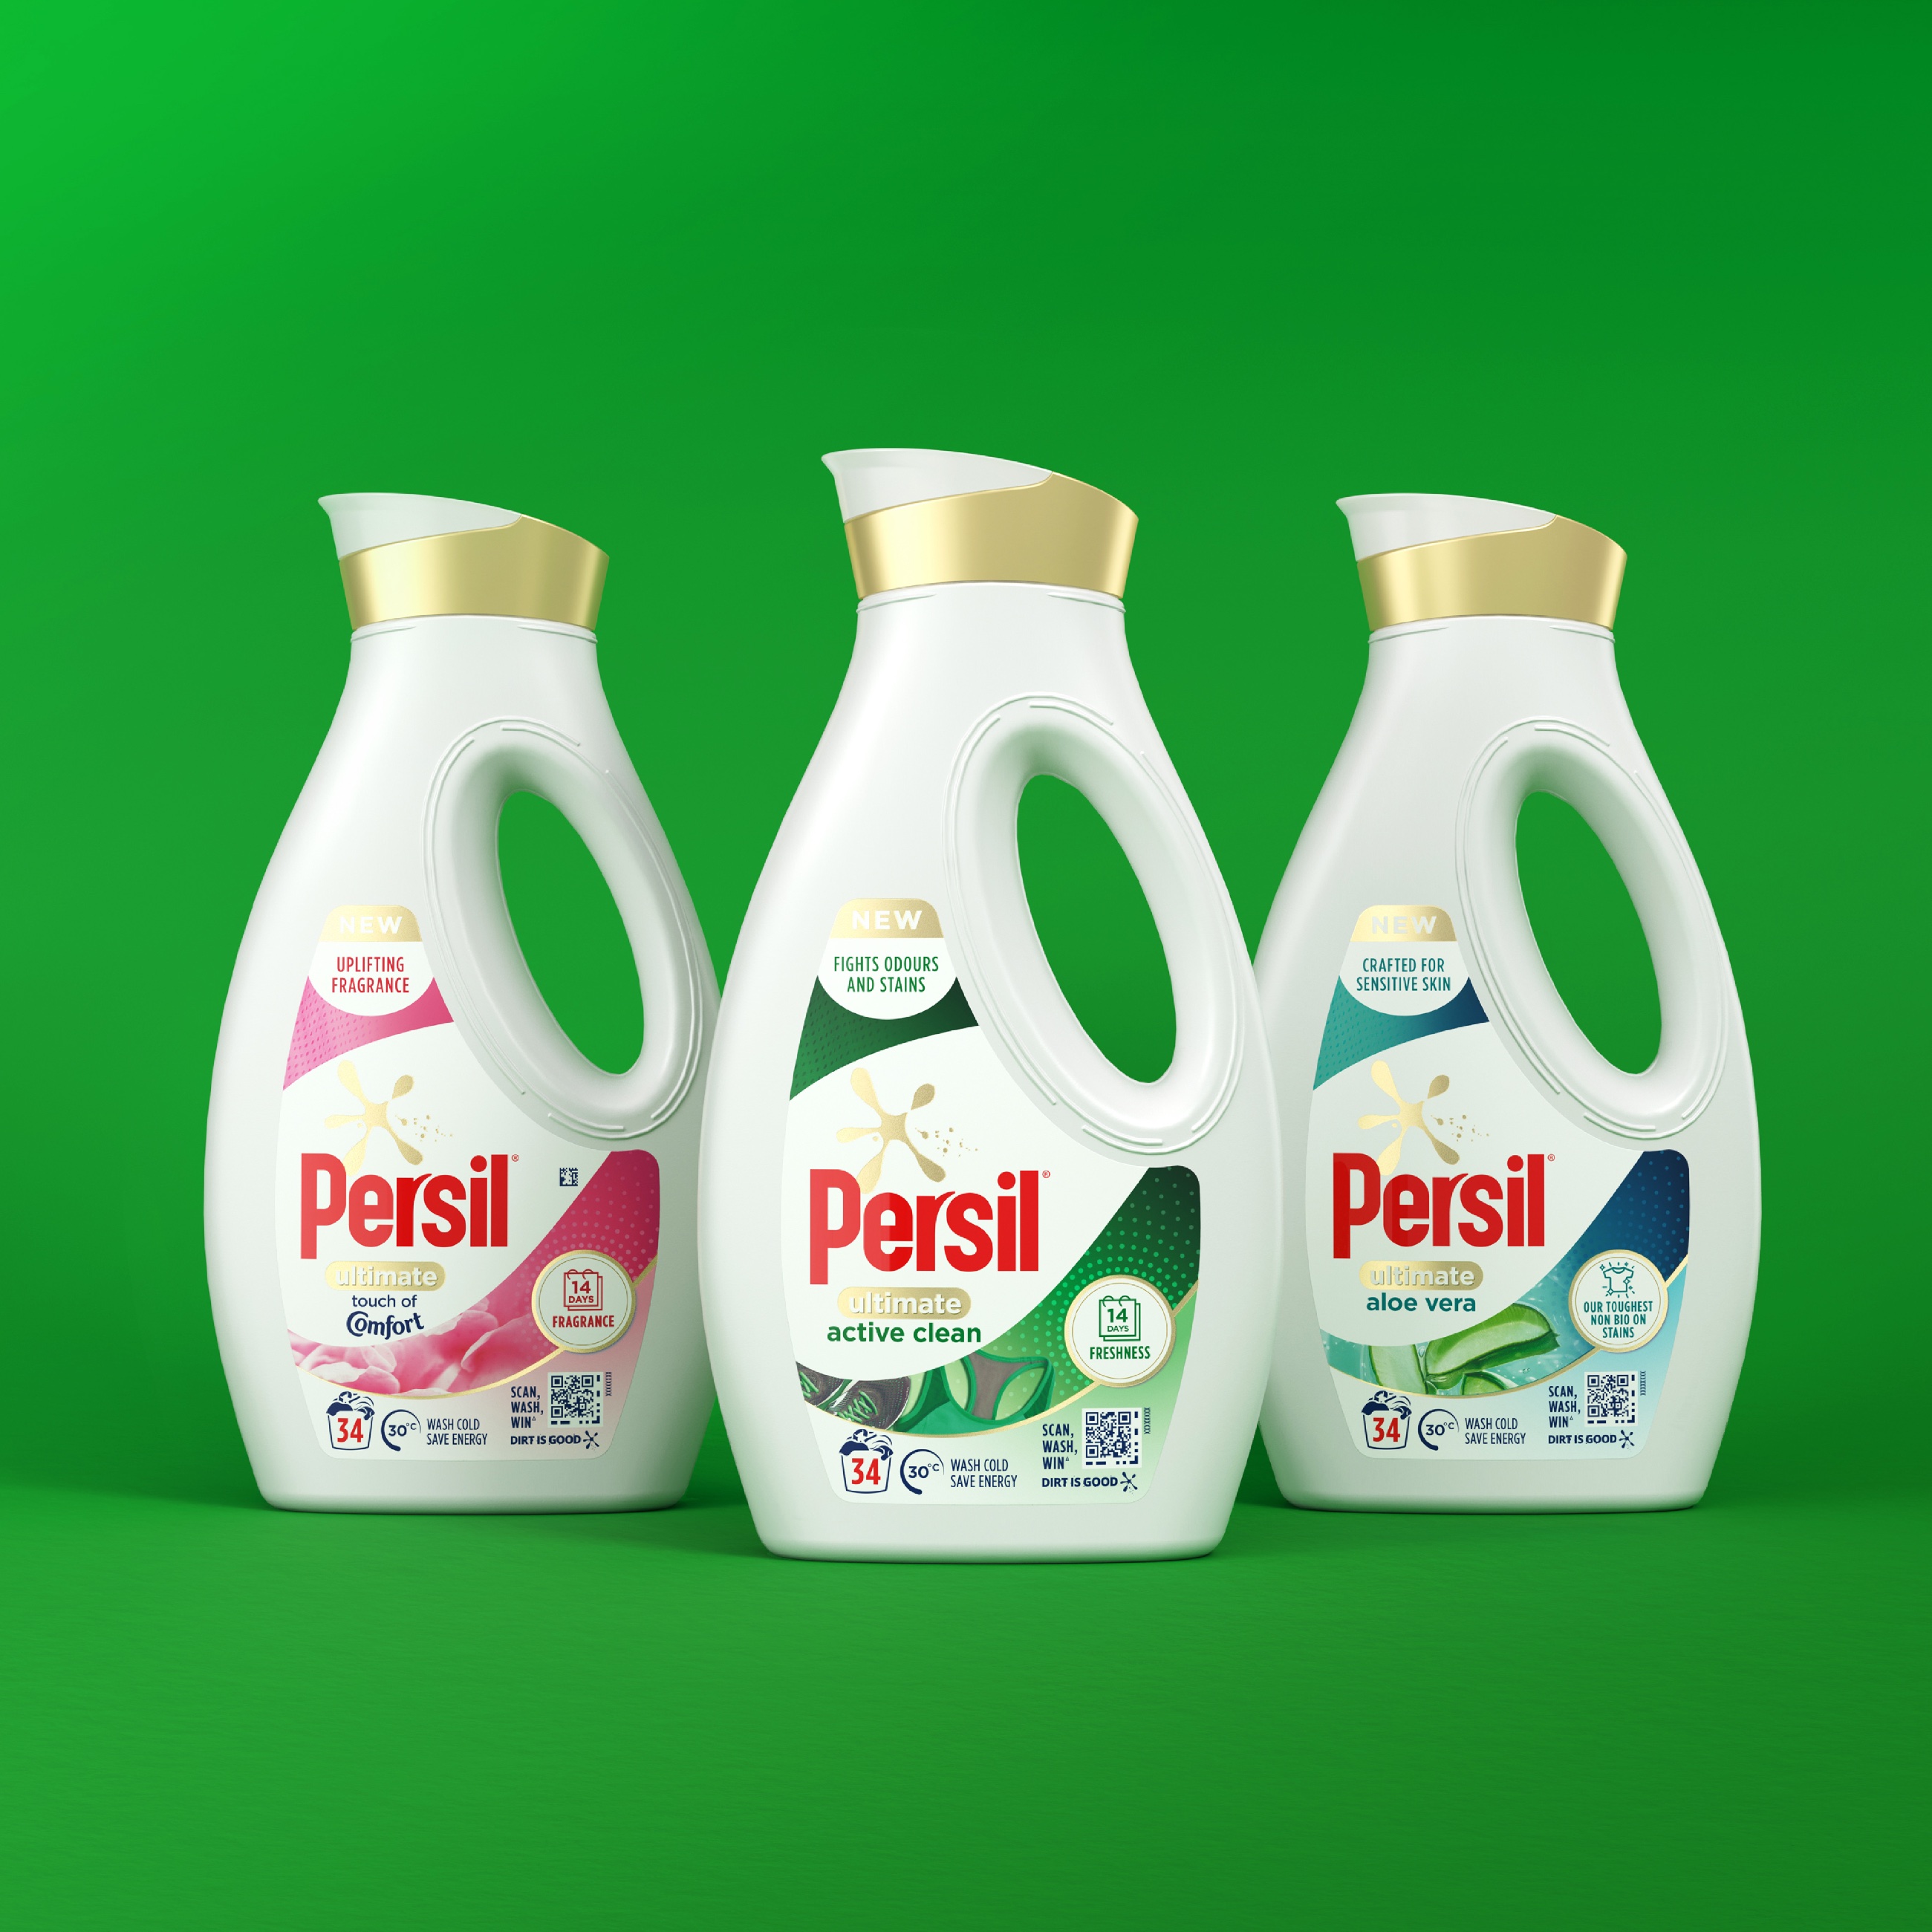 New Persil Ultimate Touch Of Comfort Liquid Detergent